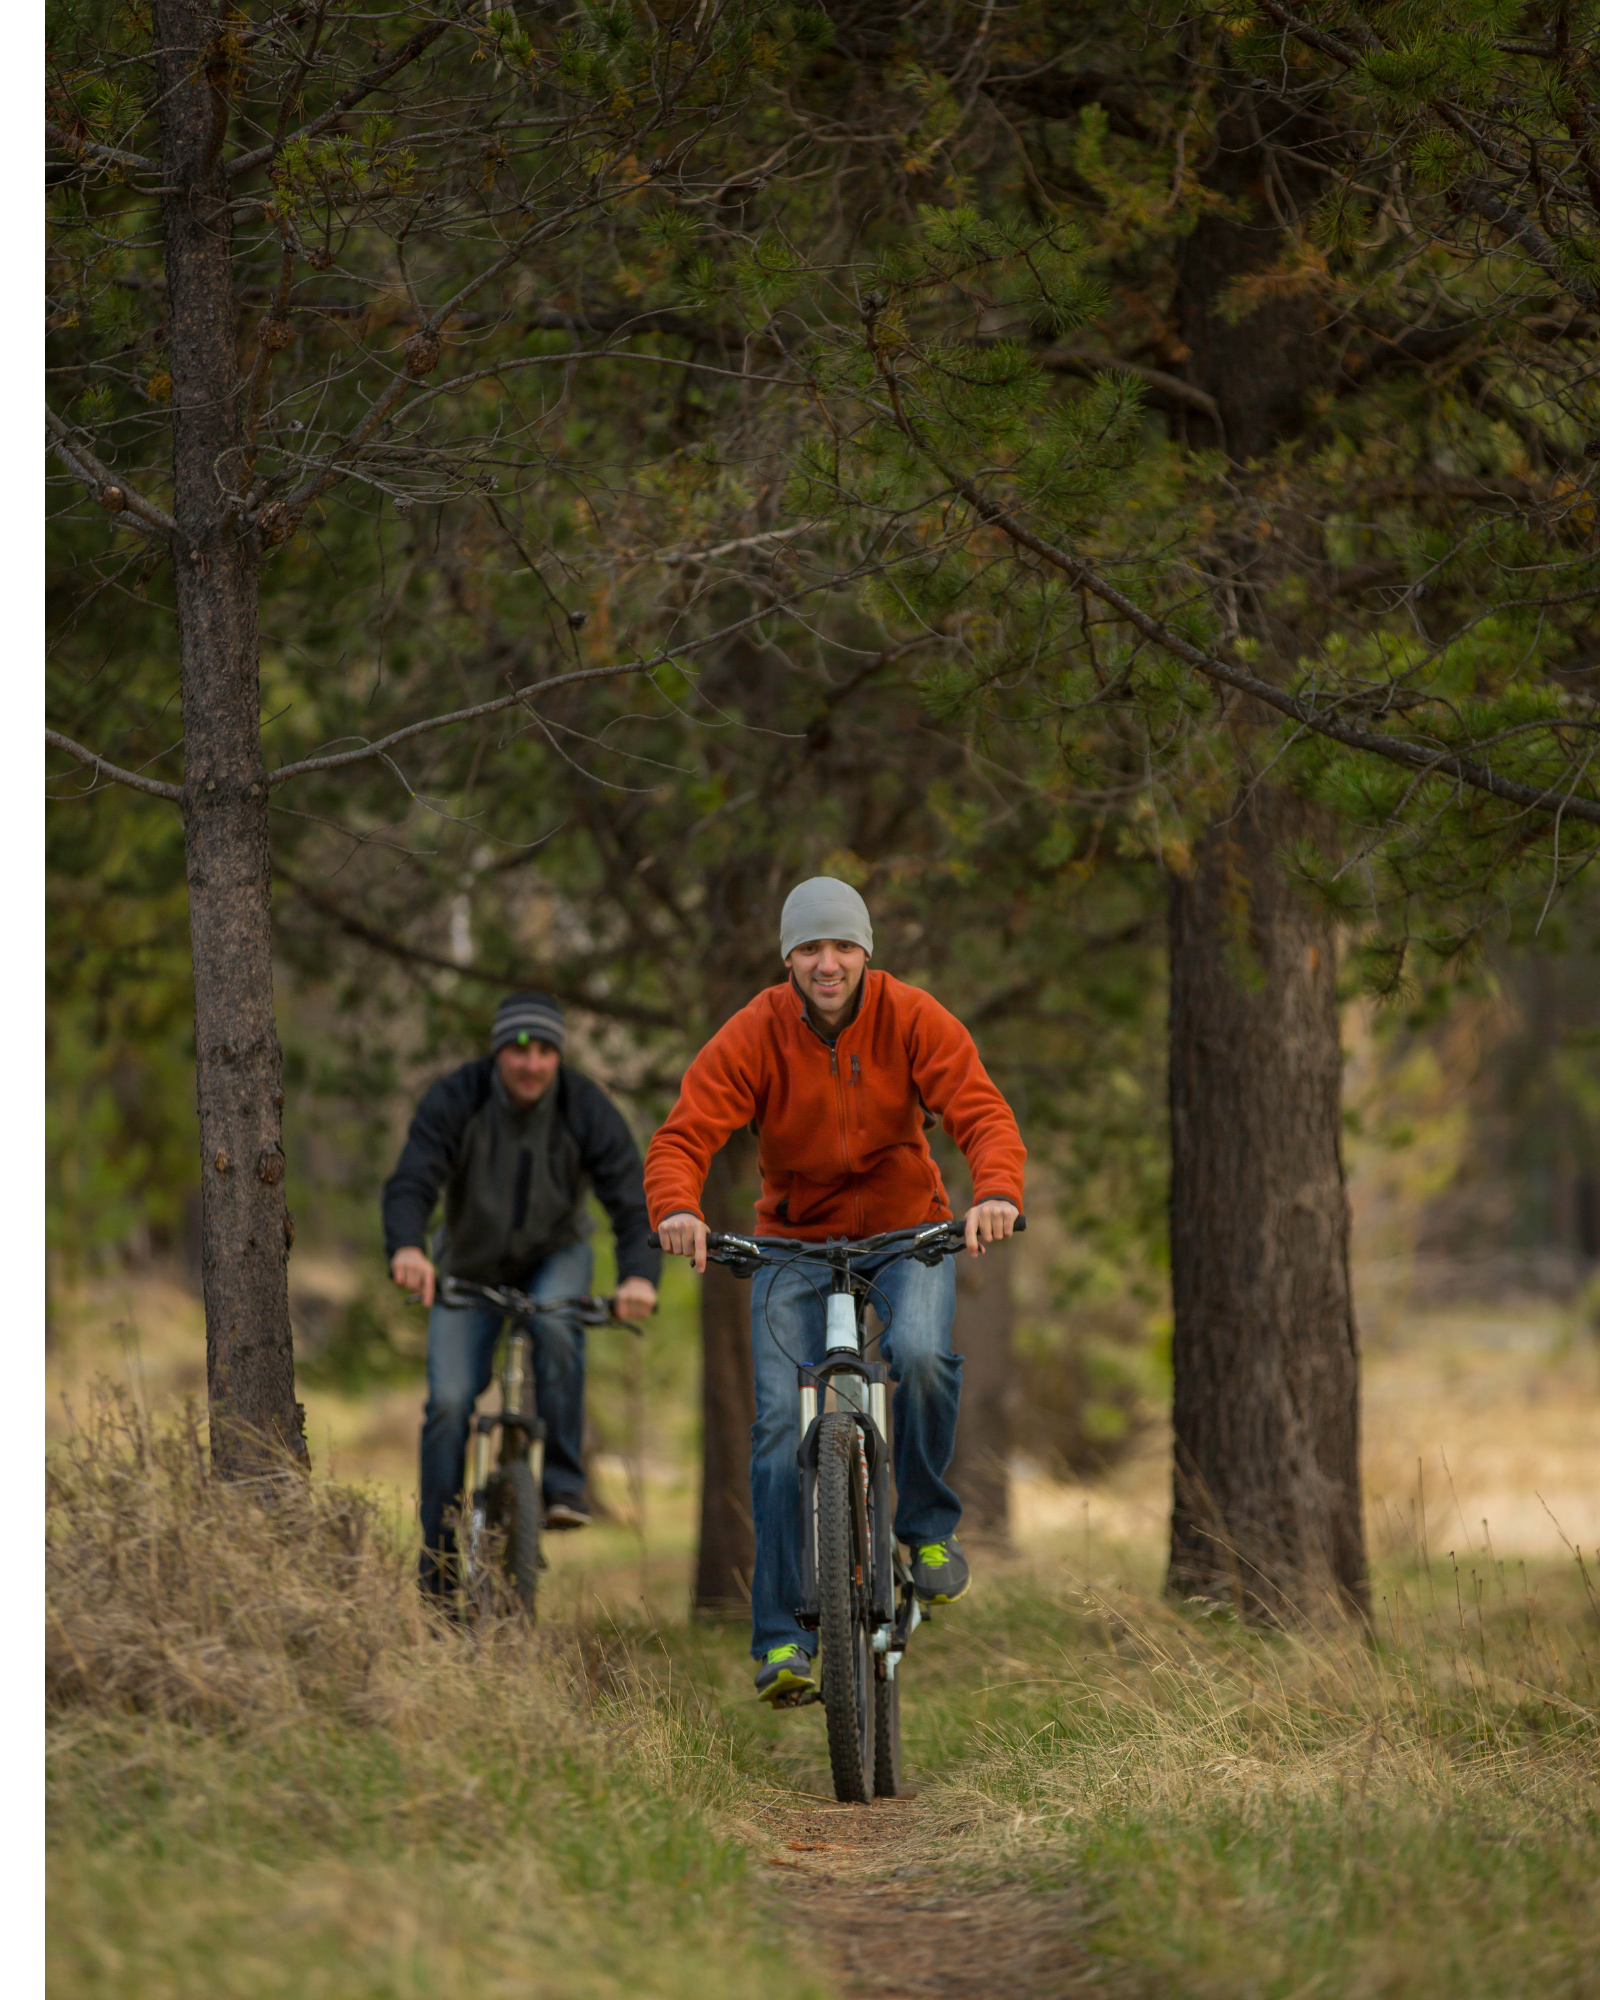 Two friends bike on a forest path as they smile. Learn how a therapist in New Bern, NC can help make new connections. Contact a young adult therapist in New Bern, NC to learn more about the benefits of online therapy in North Carolina today.